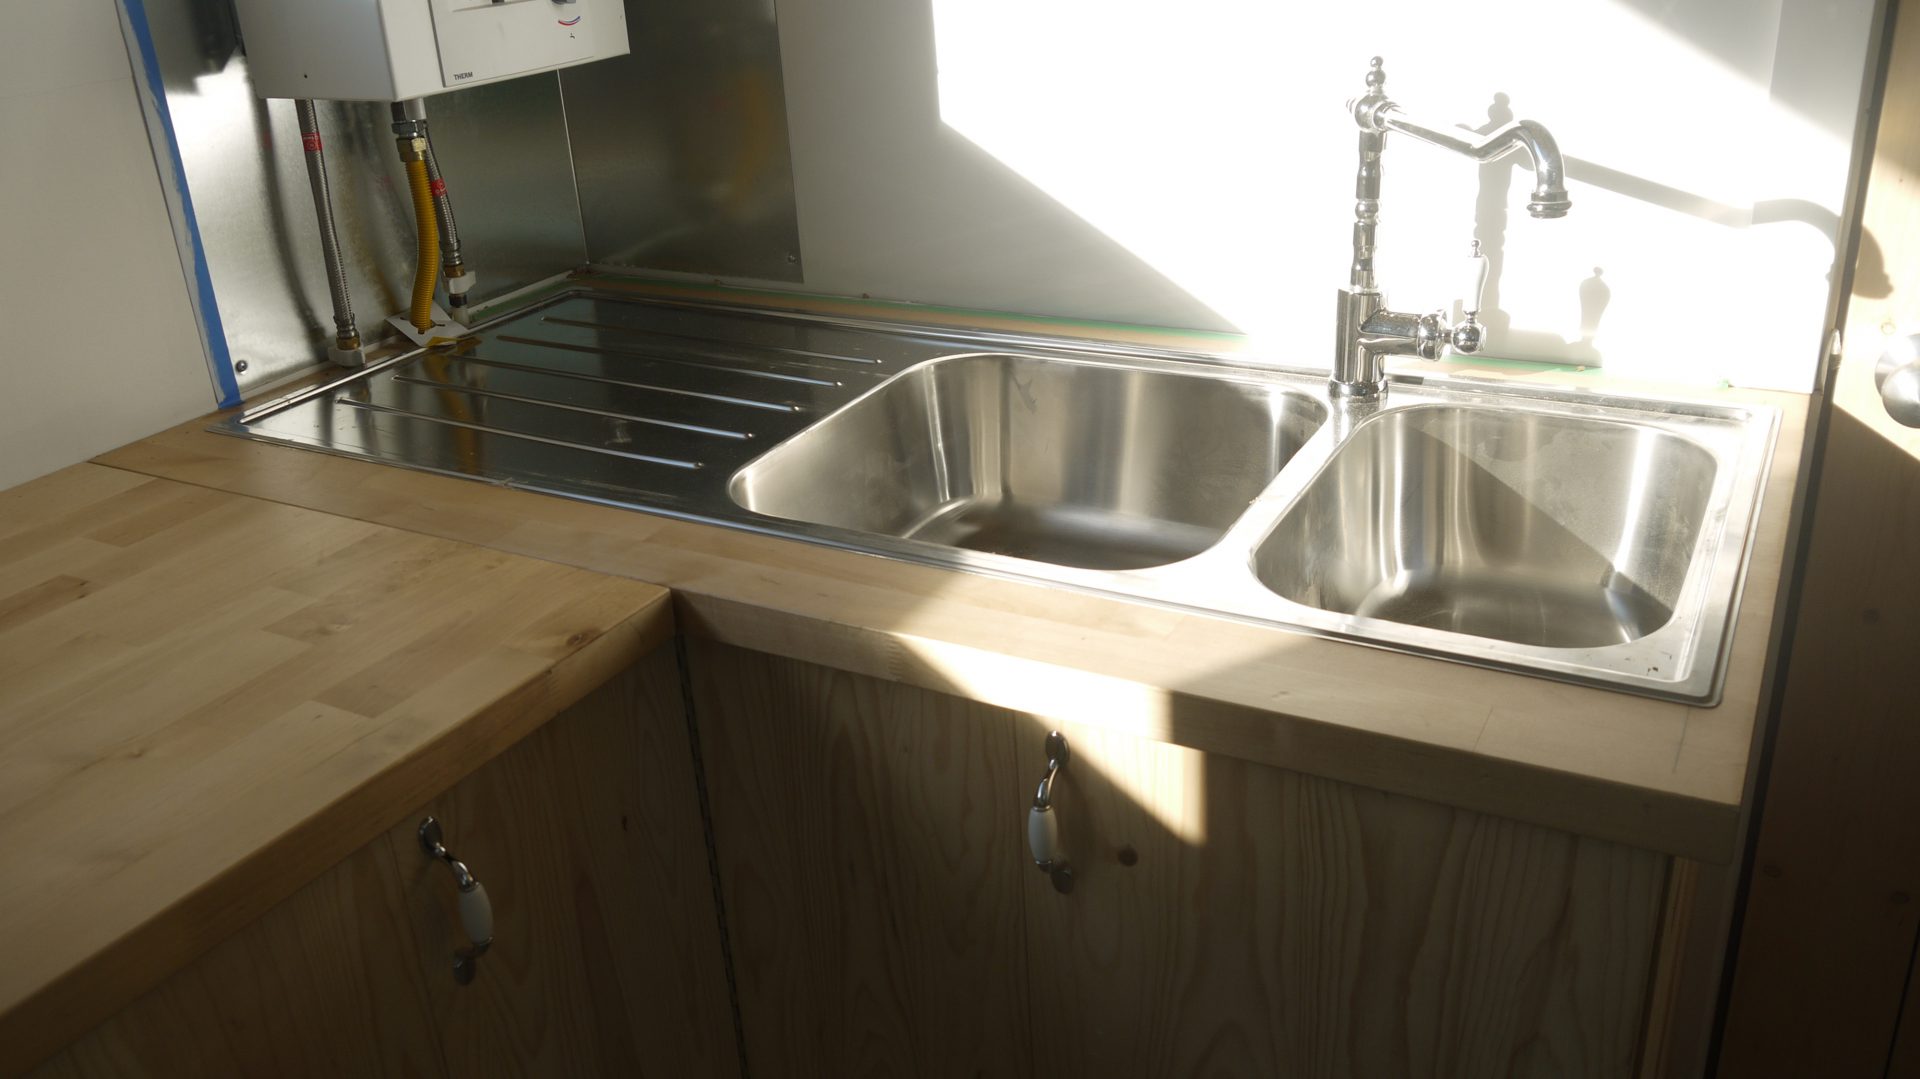 Croteau's kitchen sink and counter space. 